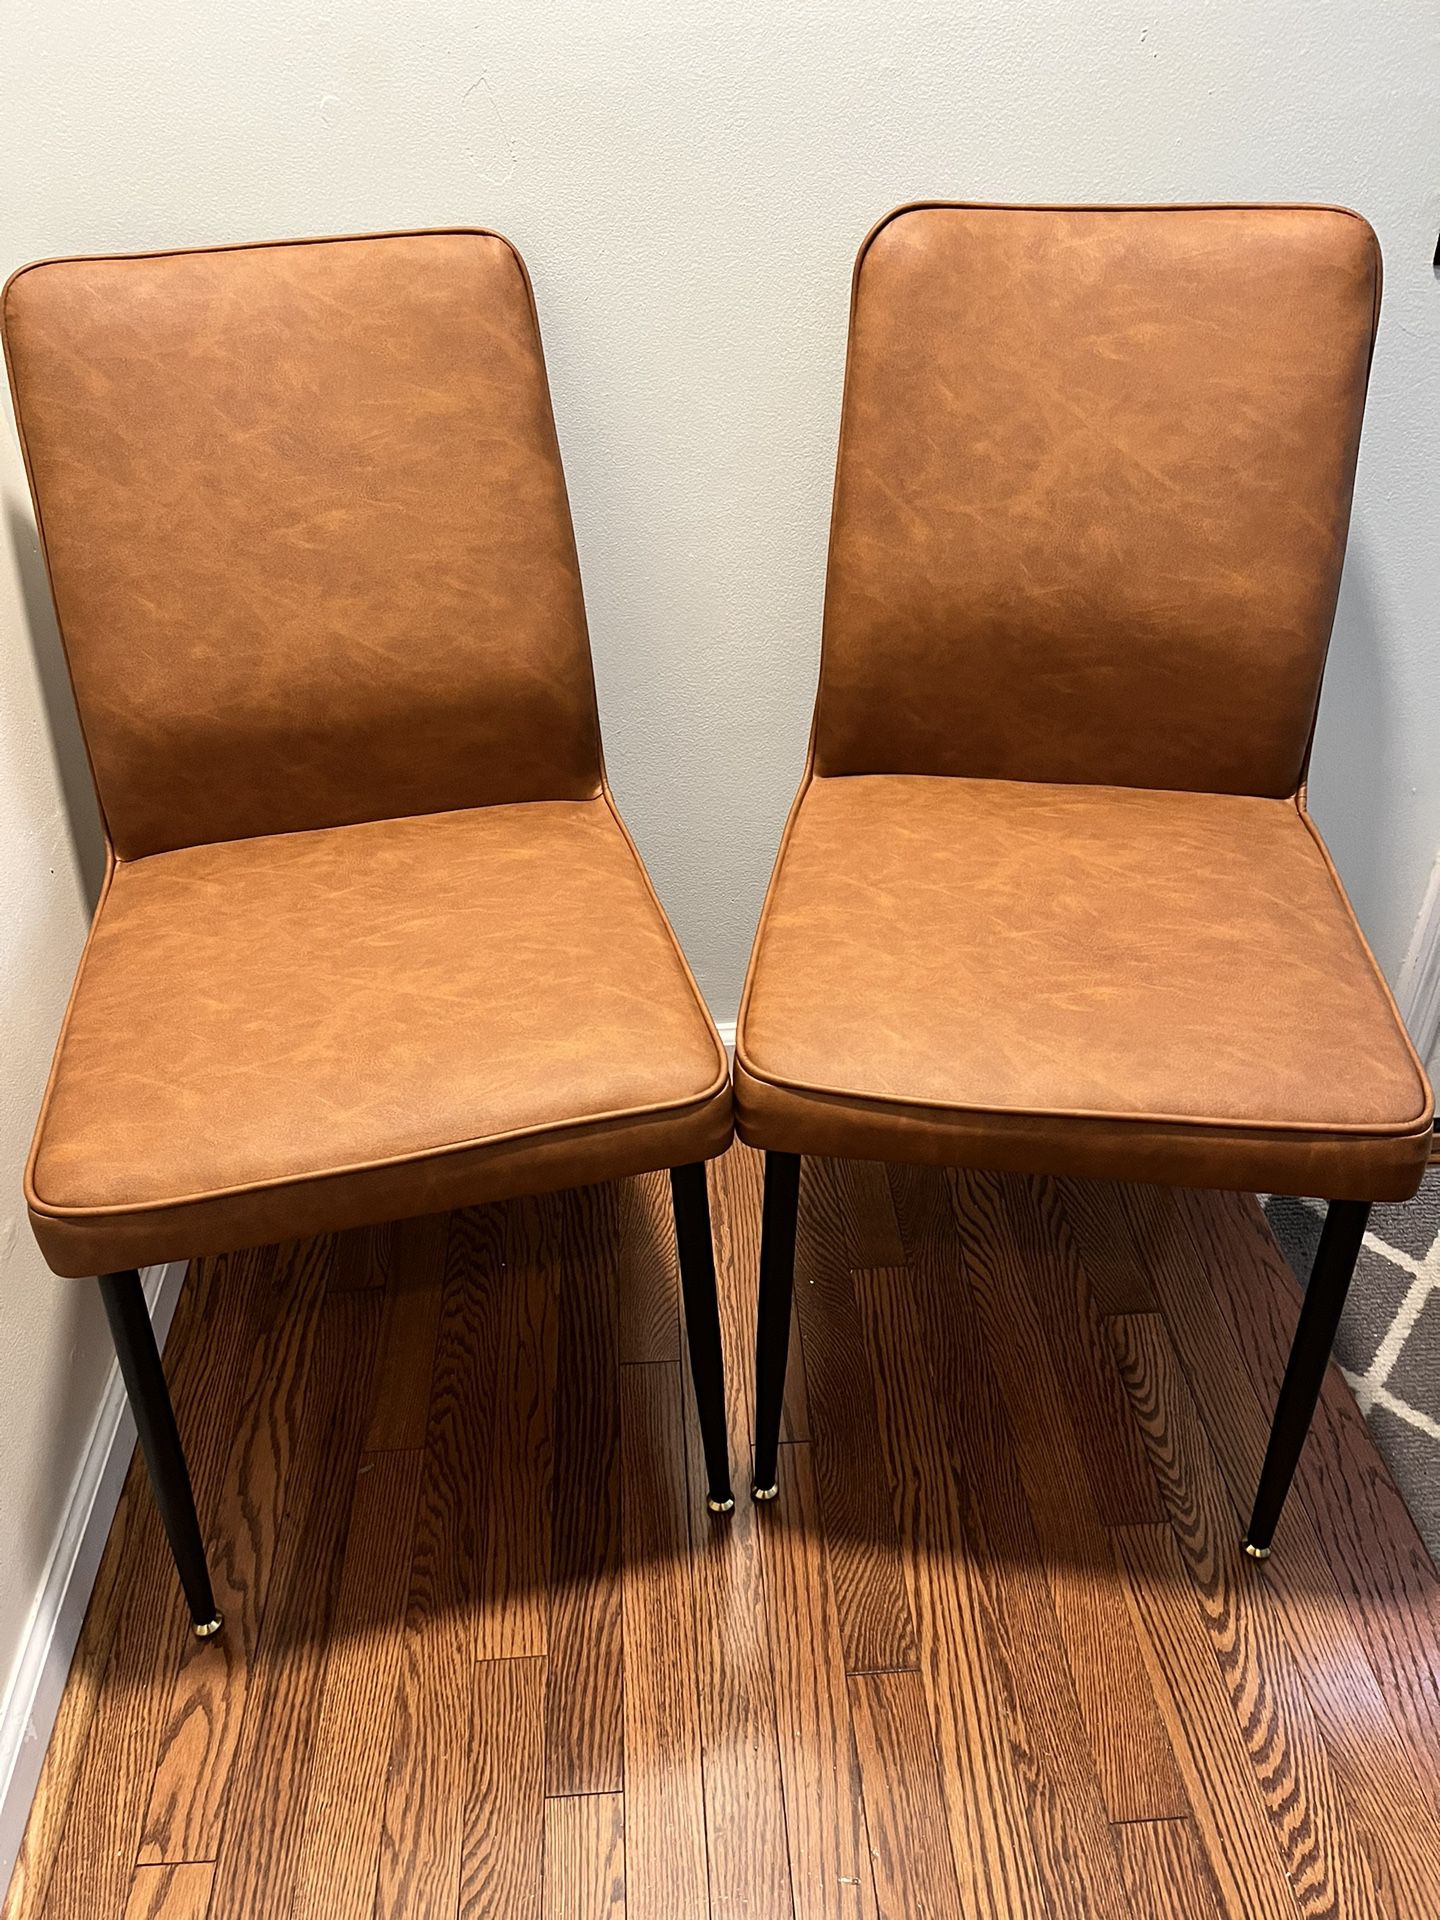 Faux Leather Tan Chairs 